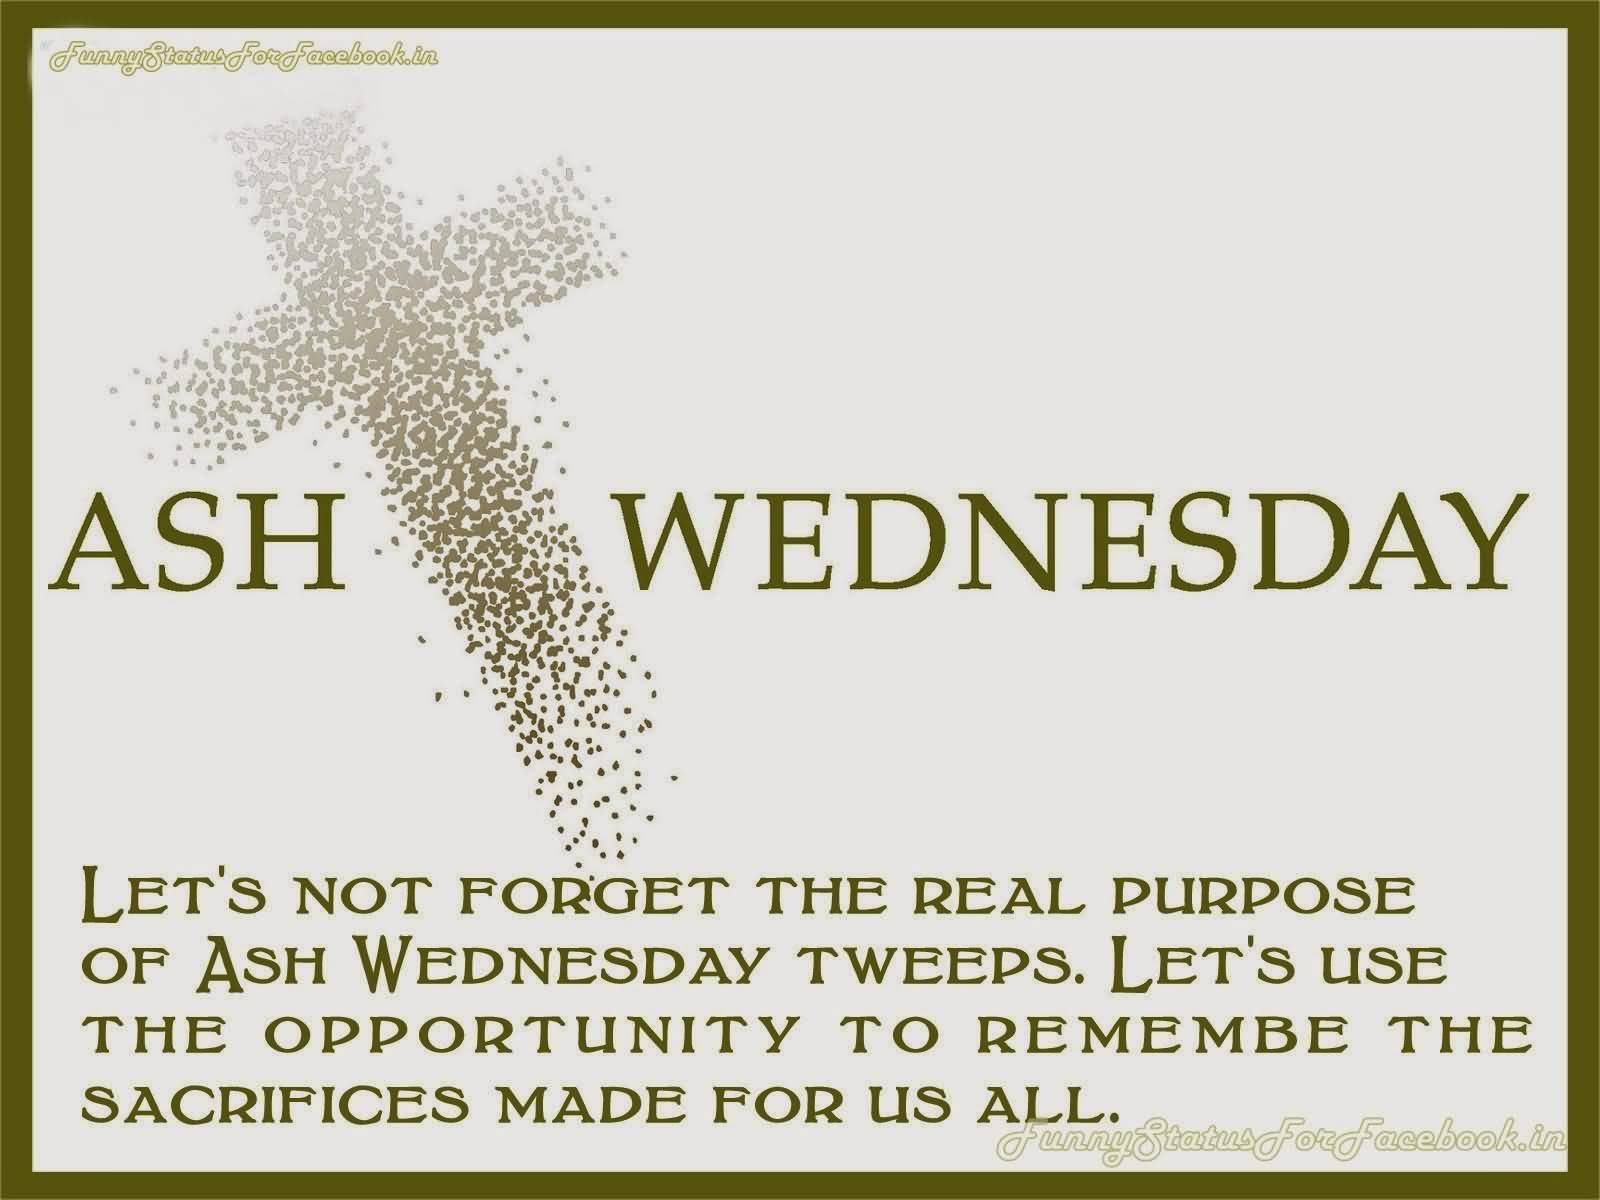 Ash Wednesday Let's Not Forget The Real Purpose Of Ash Wednesday Tweeps. Let's Use The Opportunity To Remember The Sacrifices Made For Us All